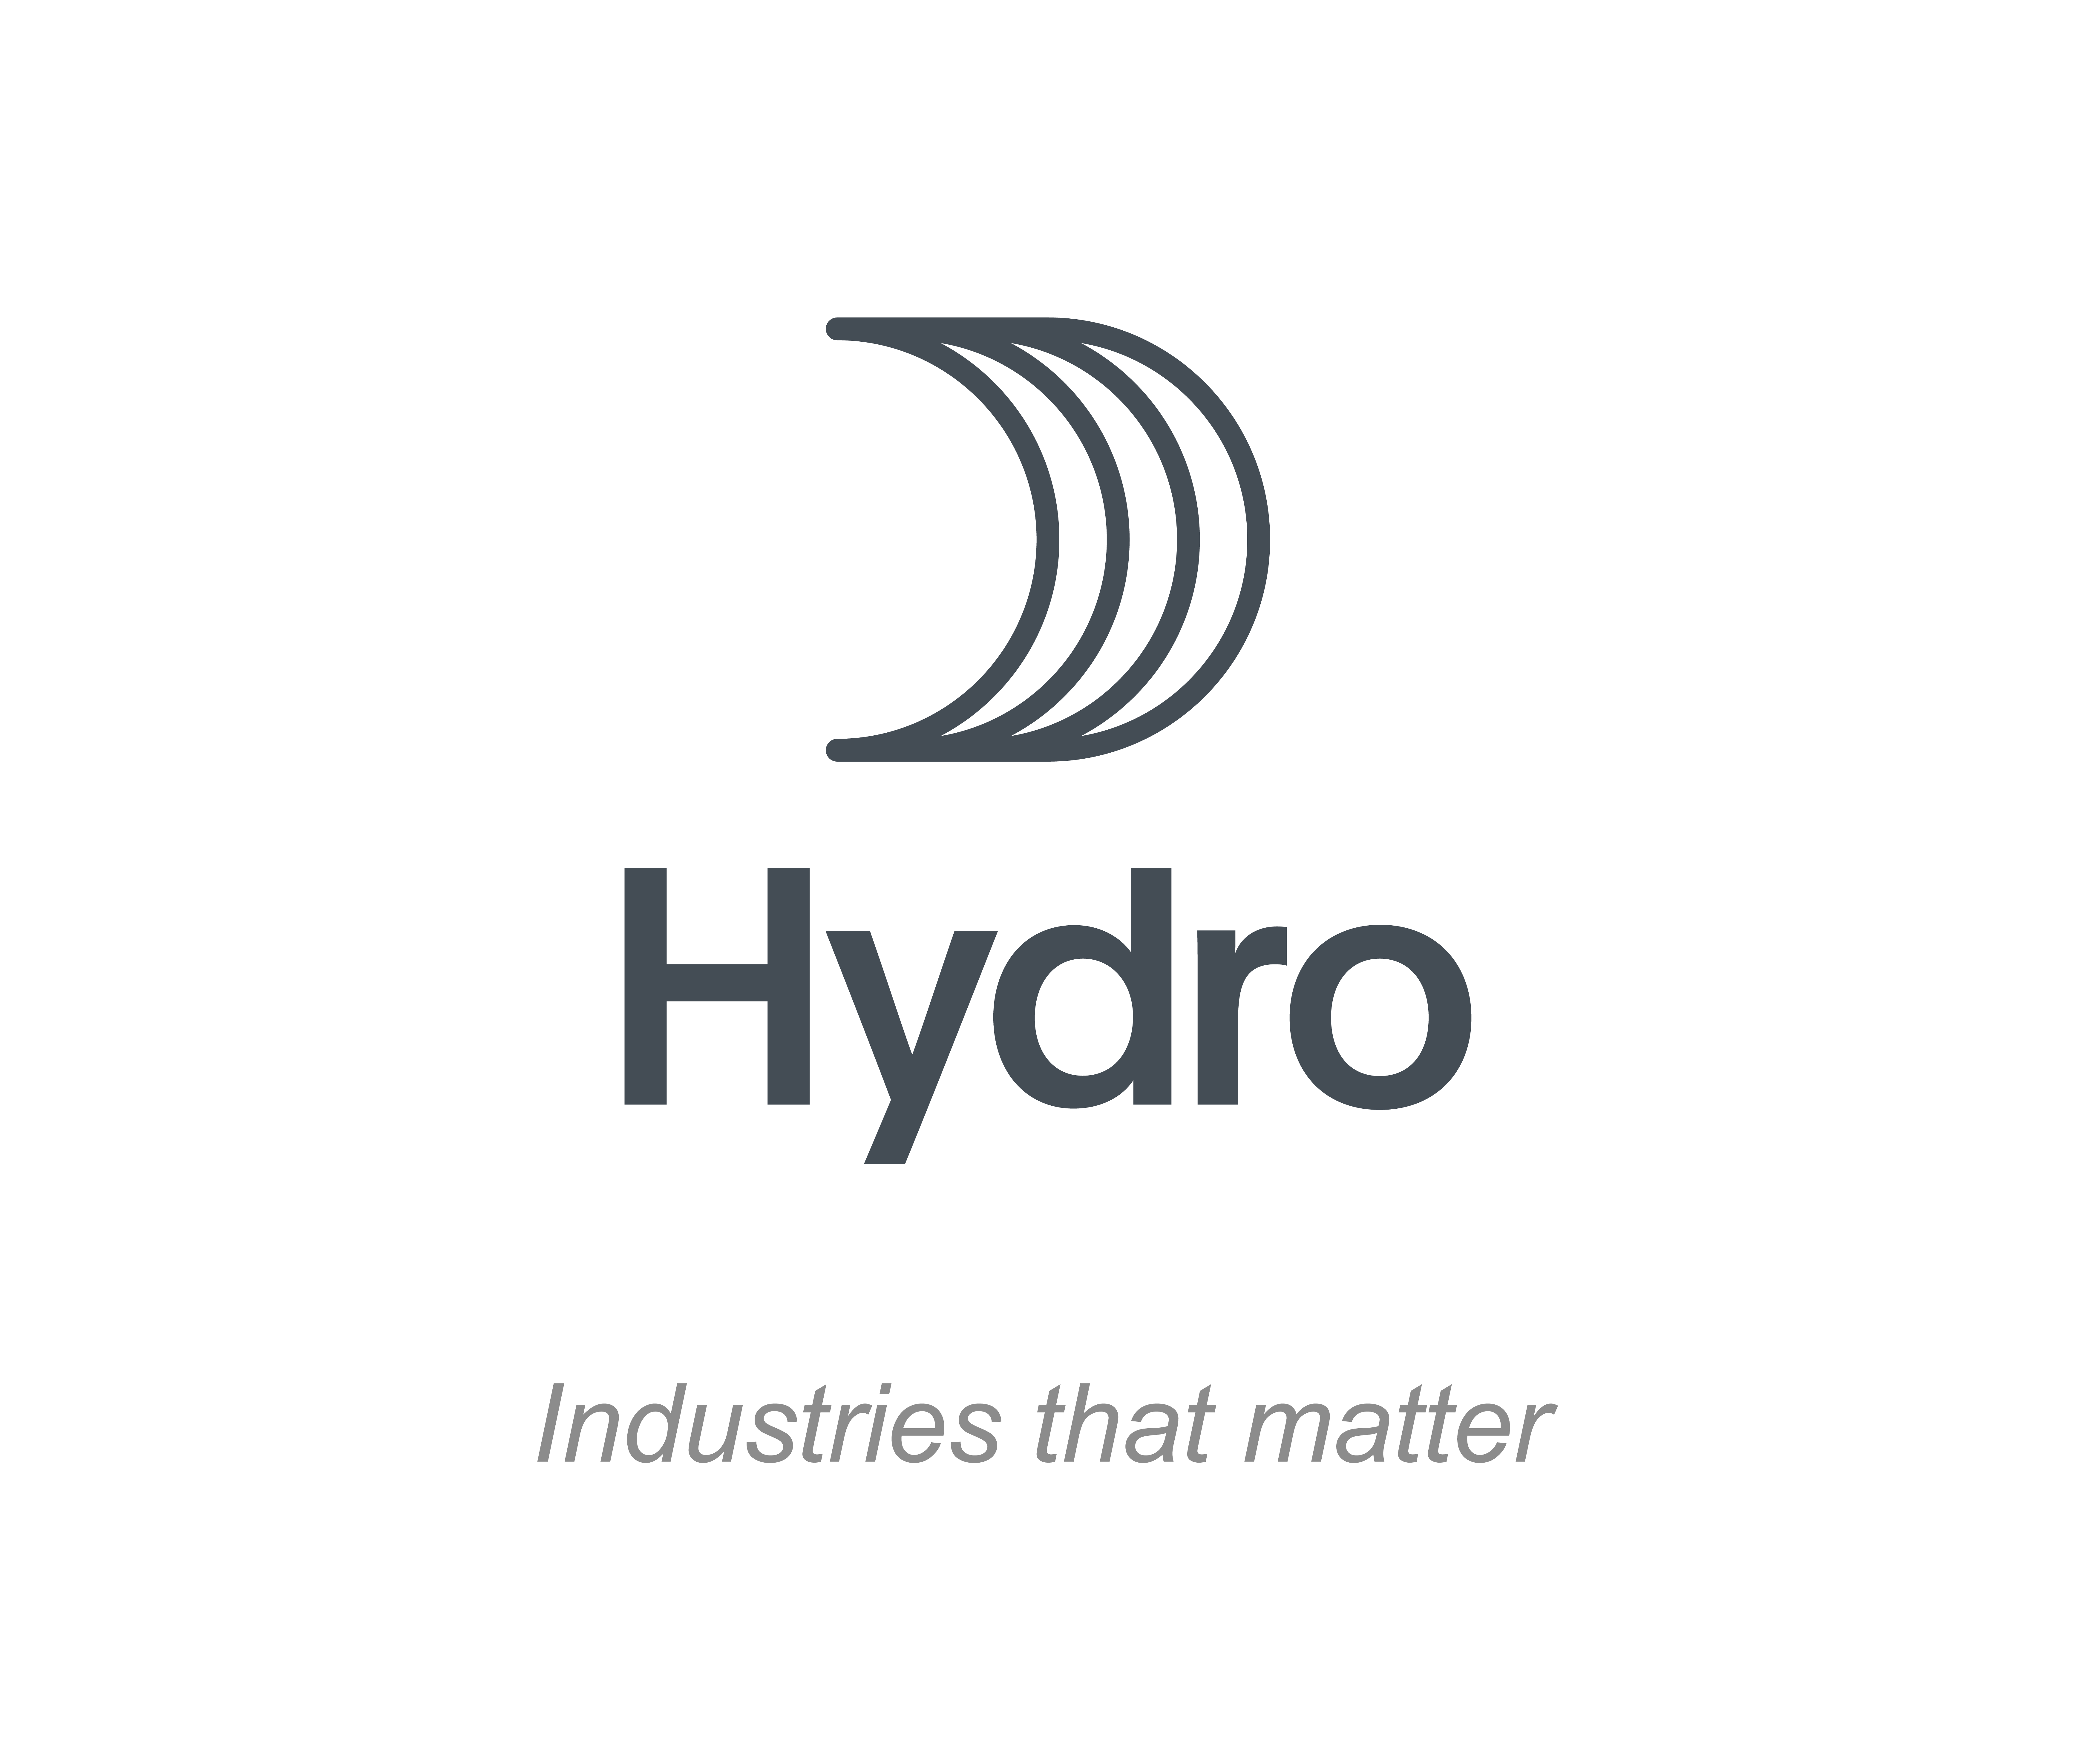 Hydro is looking for a Senior Enterprise Architect